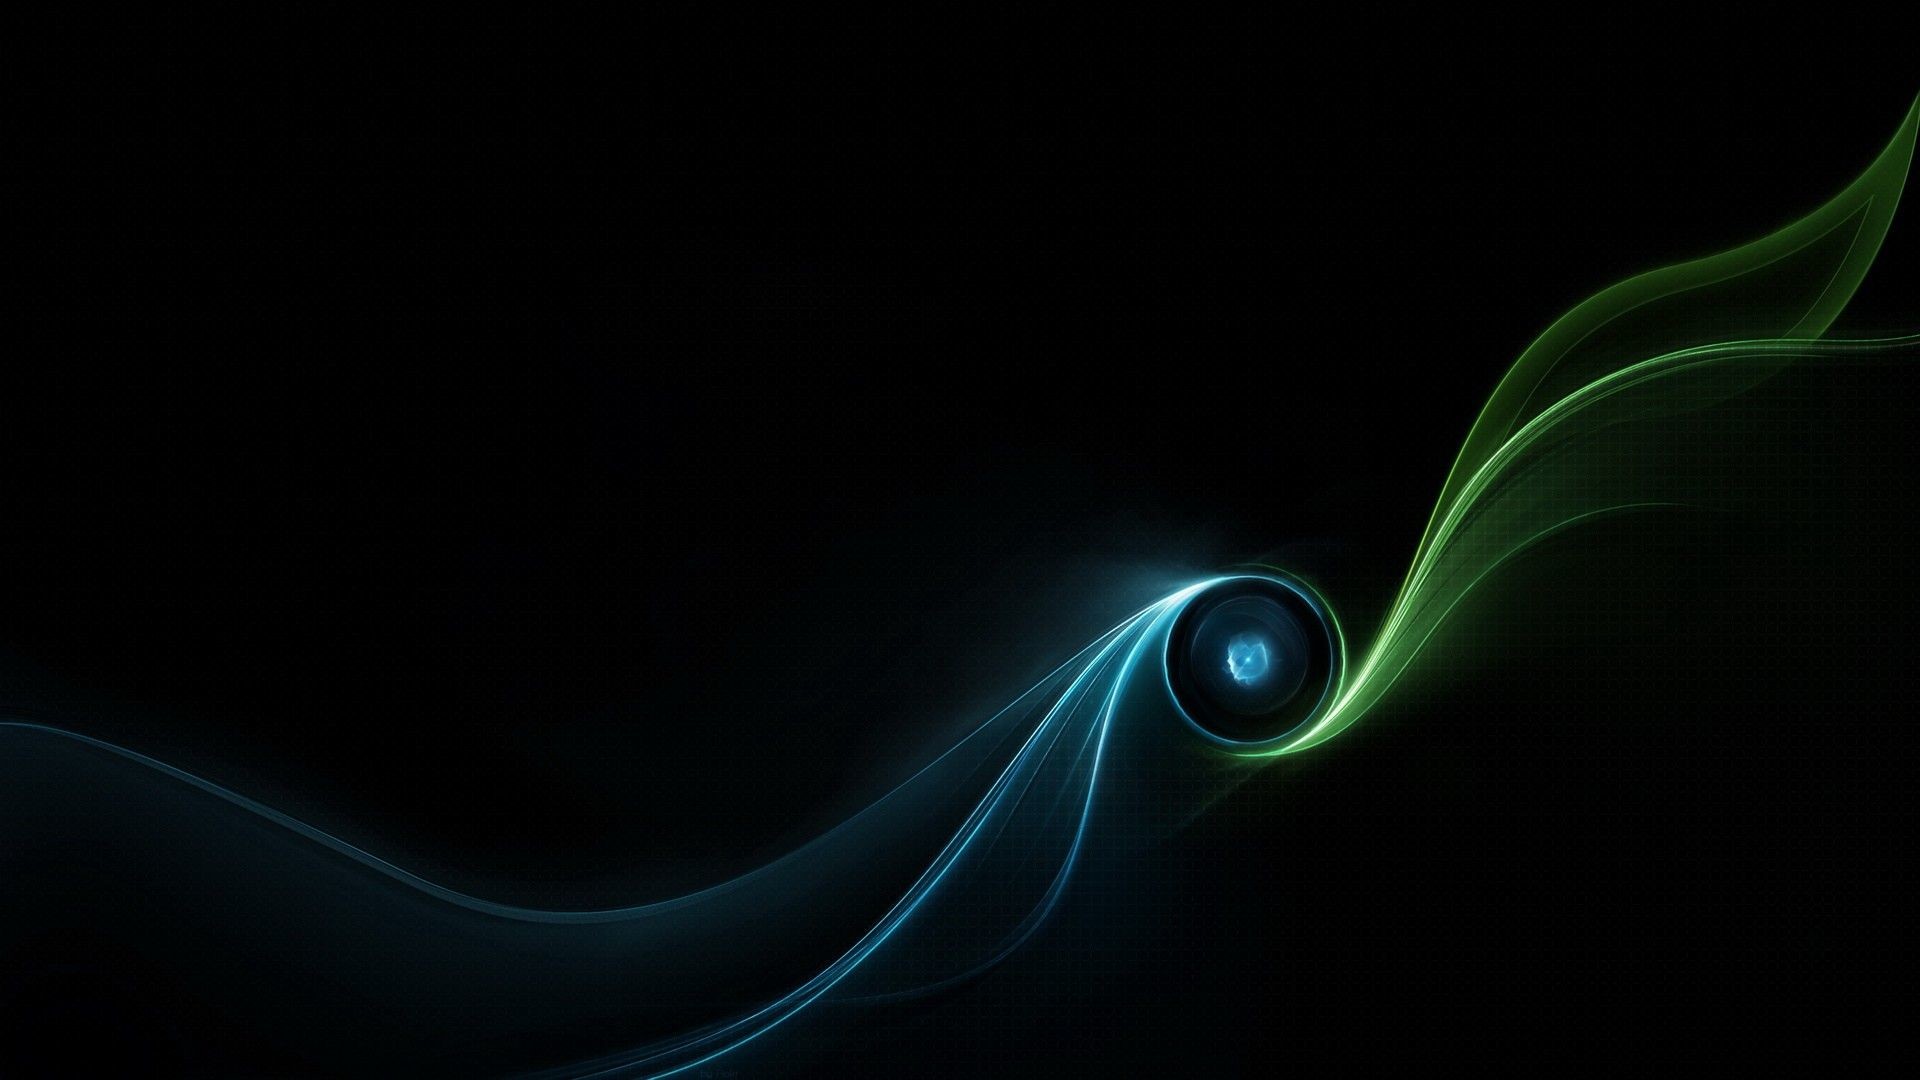 1920x1080 ... Awesome Dark Abstract Wallpapers Mobile